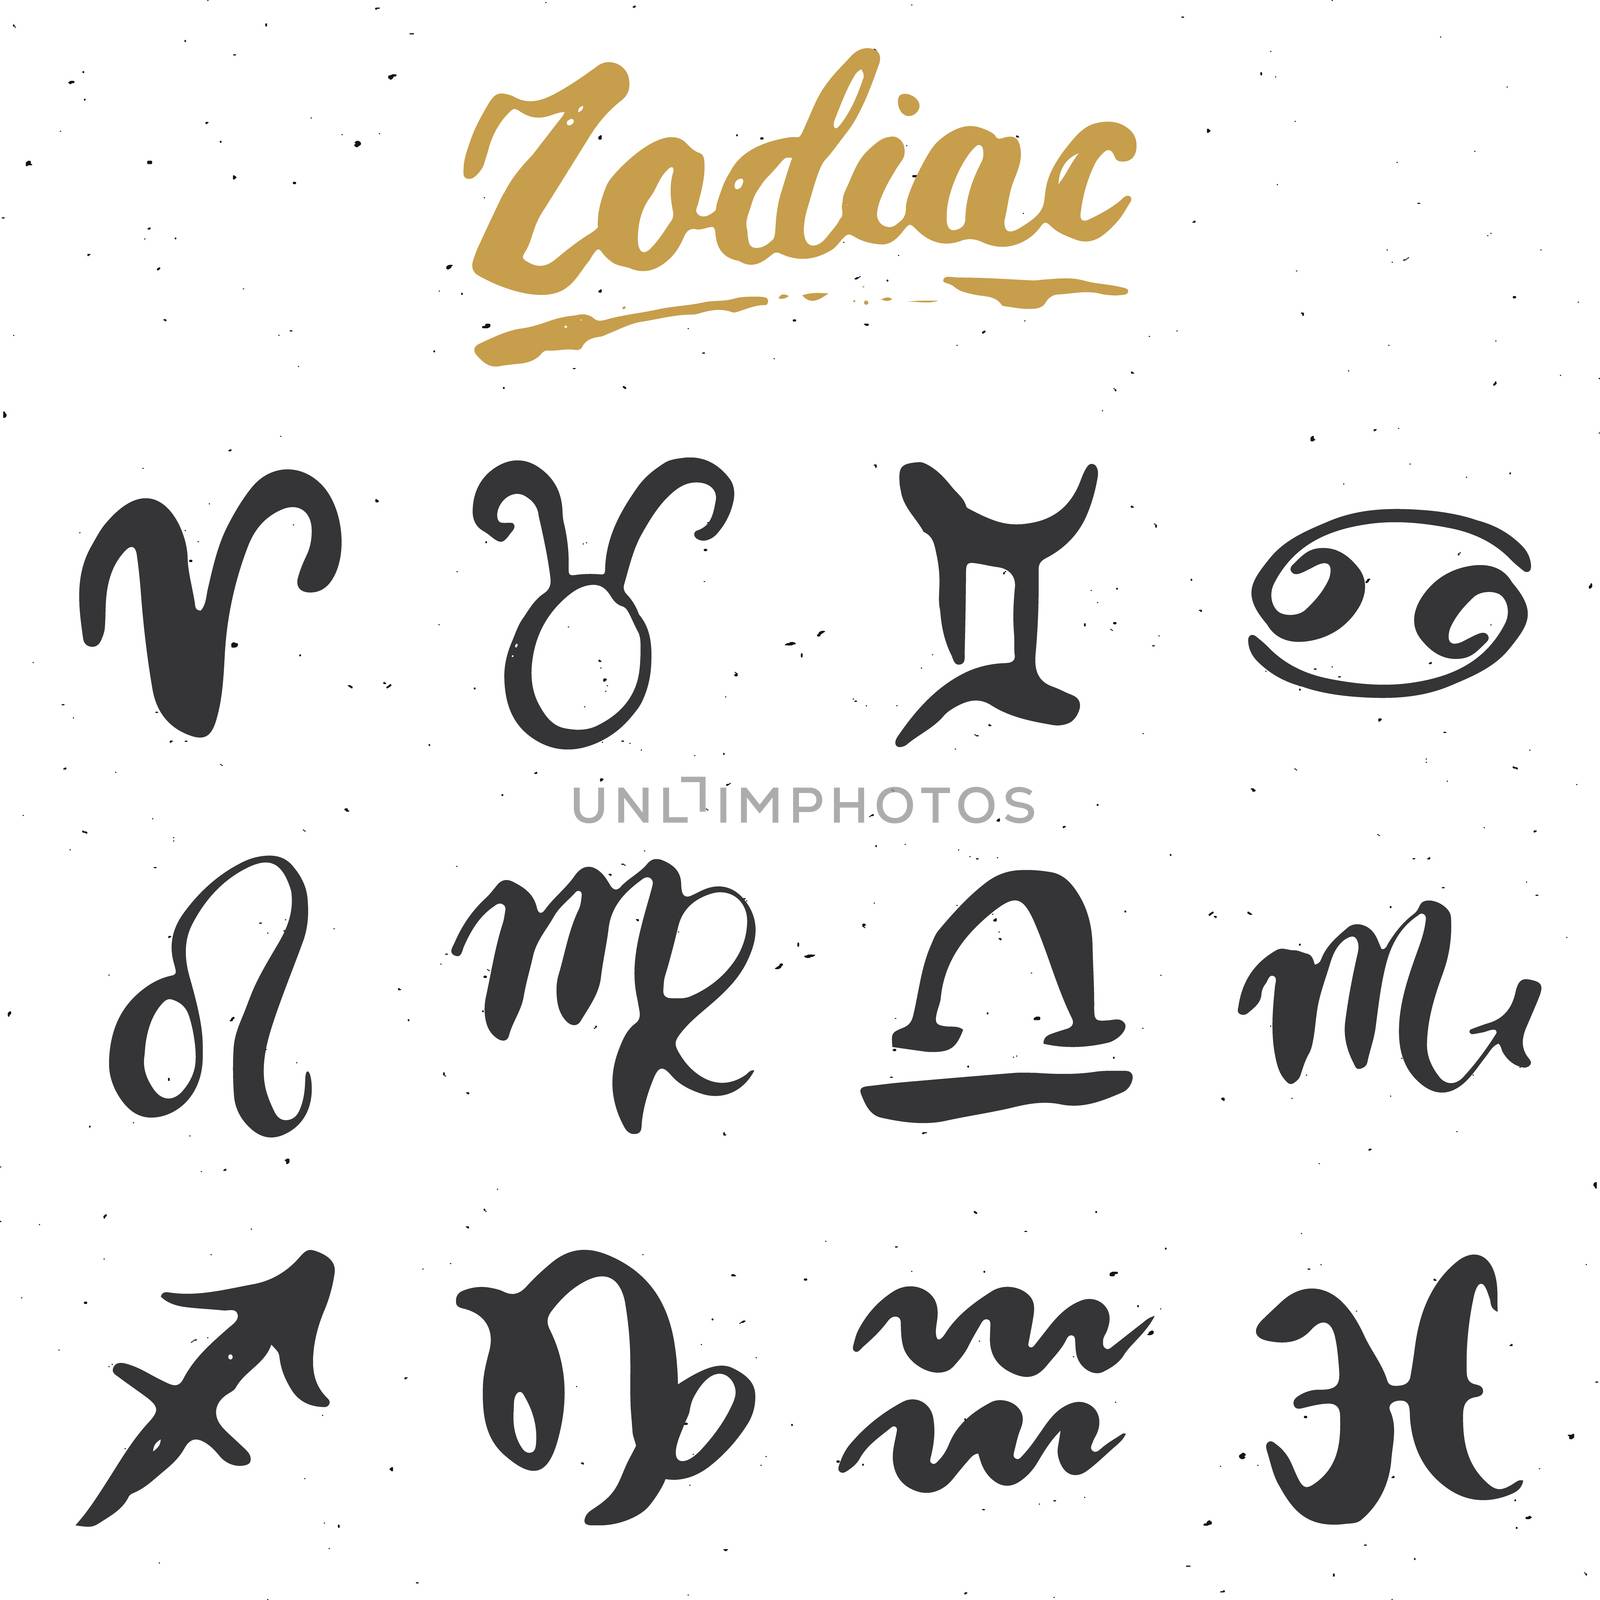 Zodiac signs set and letterings. Hand drawn horoscope astrology symbols, grunge textured design, typography print, vector illustration by Lemon_workshop